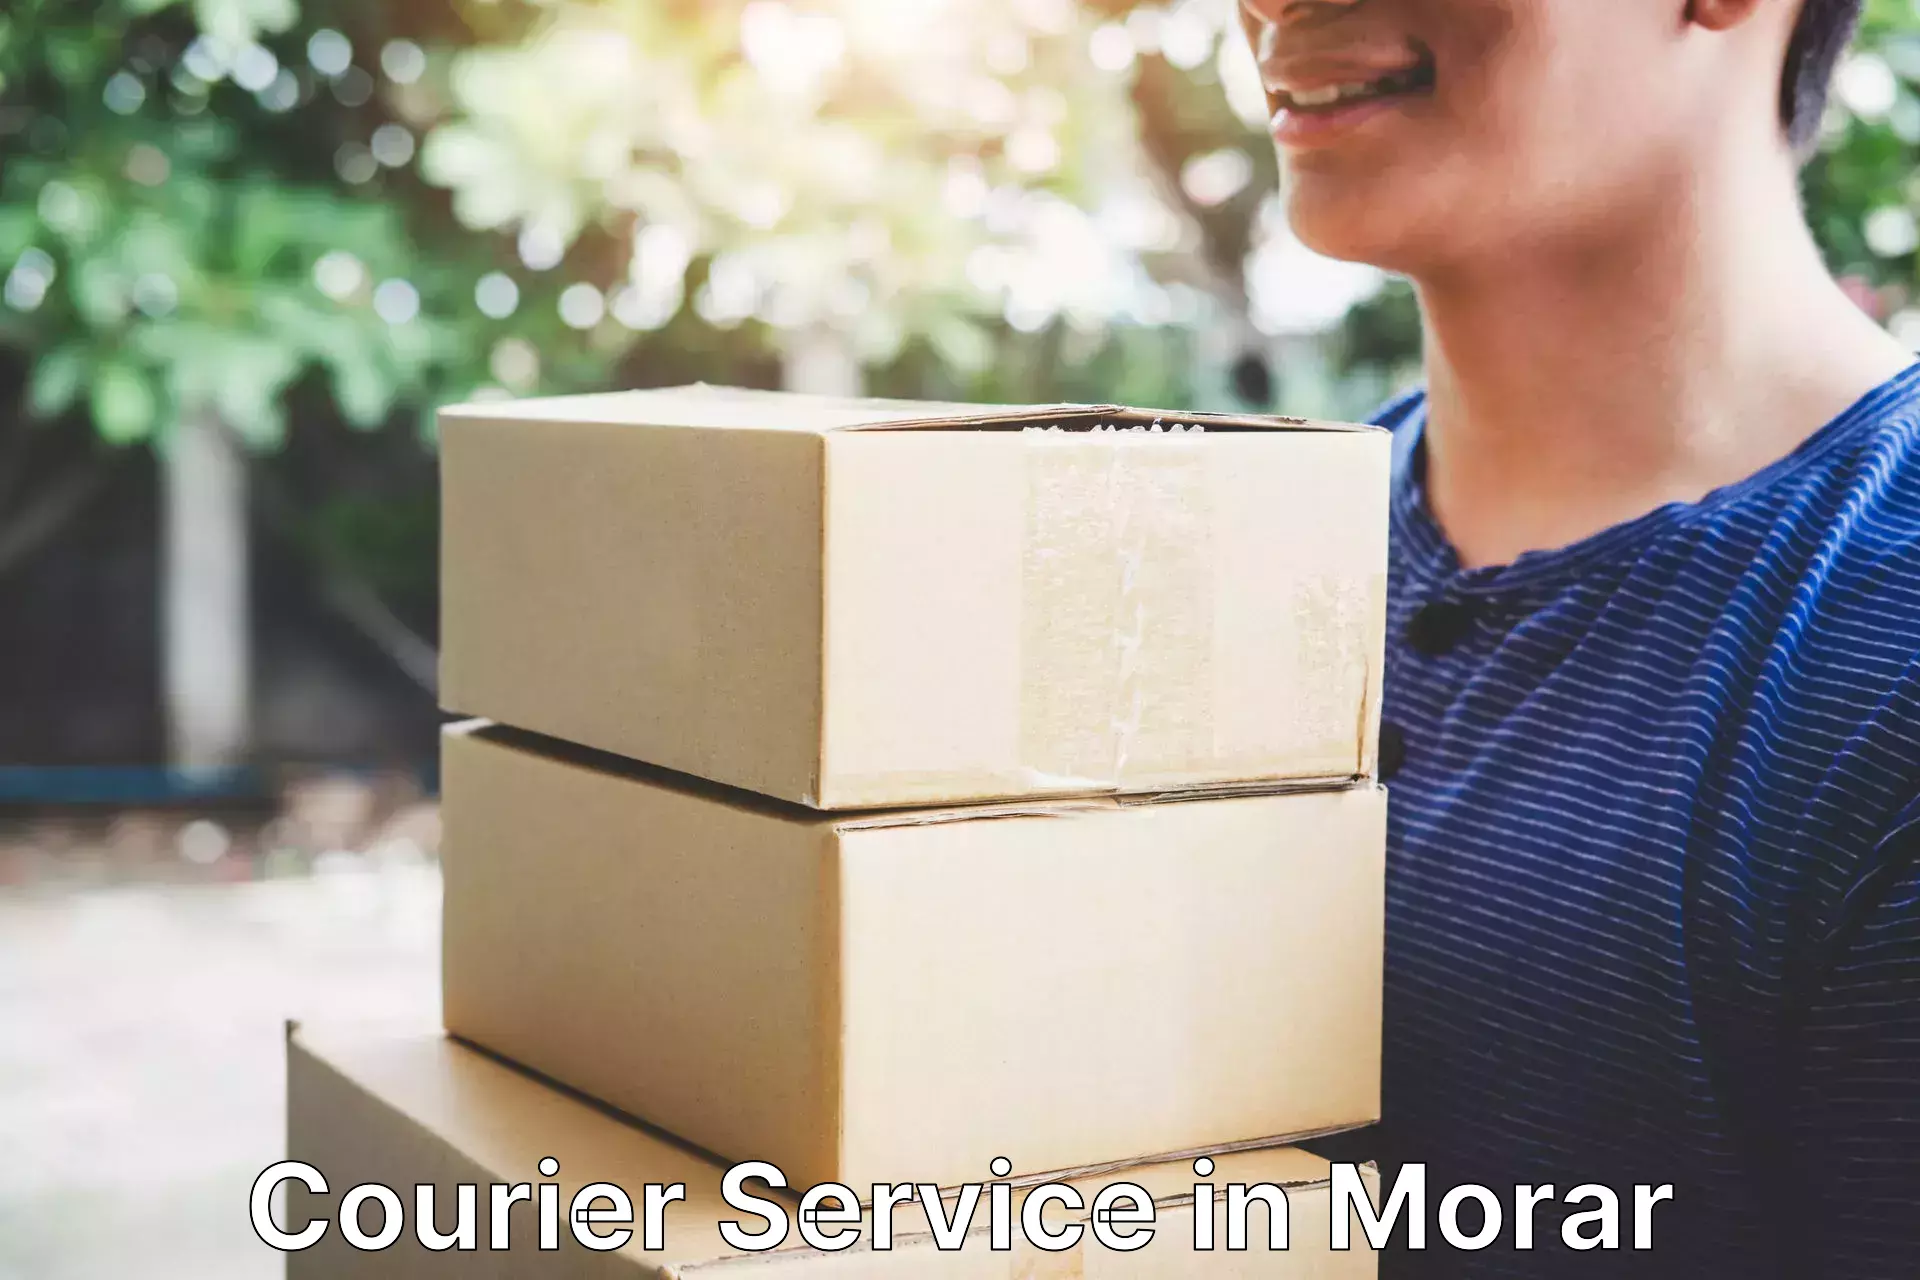 Round-the-clock parcel delivery in Morar